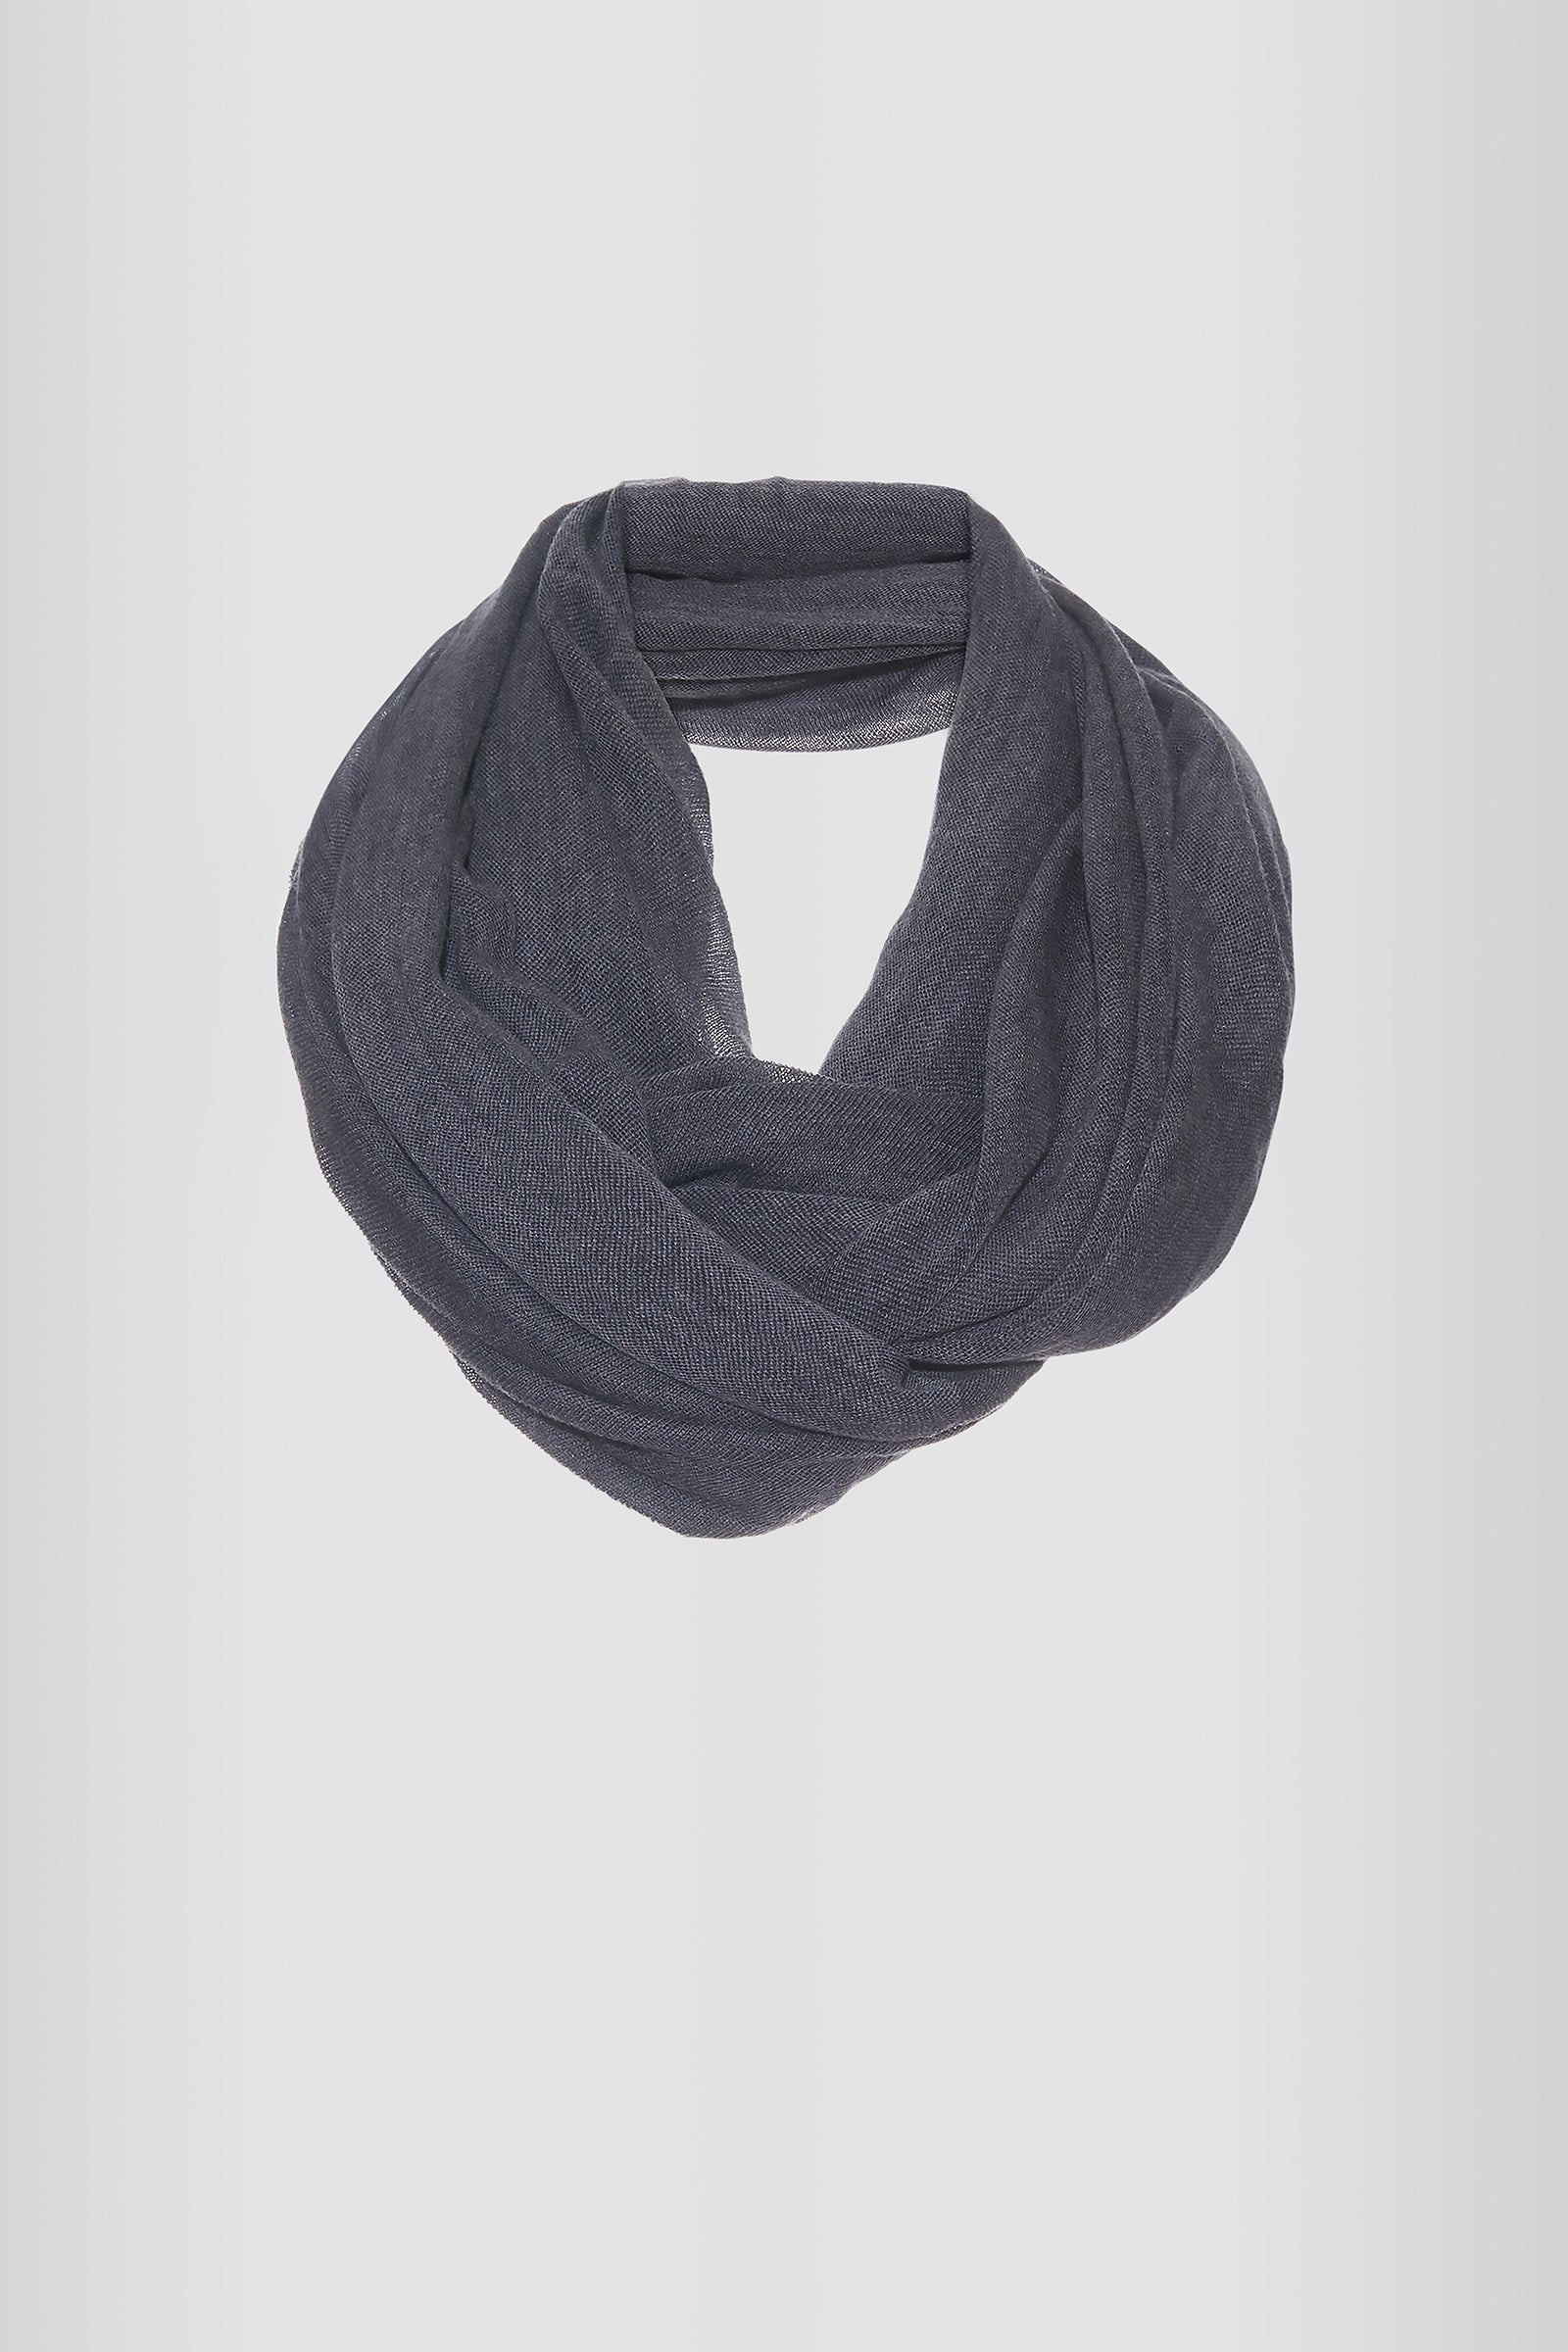 Kal Rieman Infinity Circle Scarf in Charcoal on Model Front Full View Tied